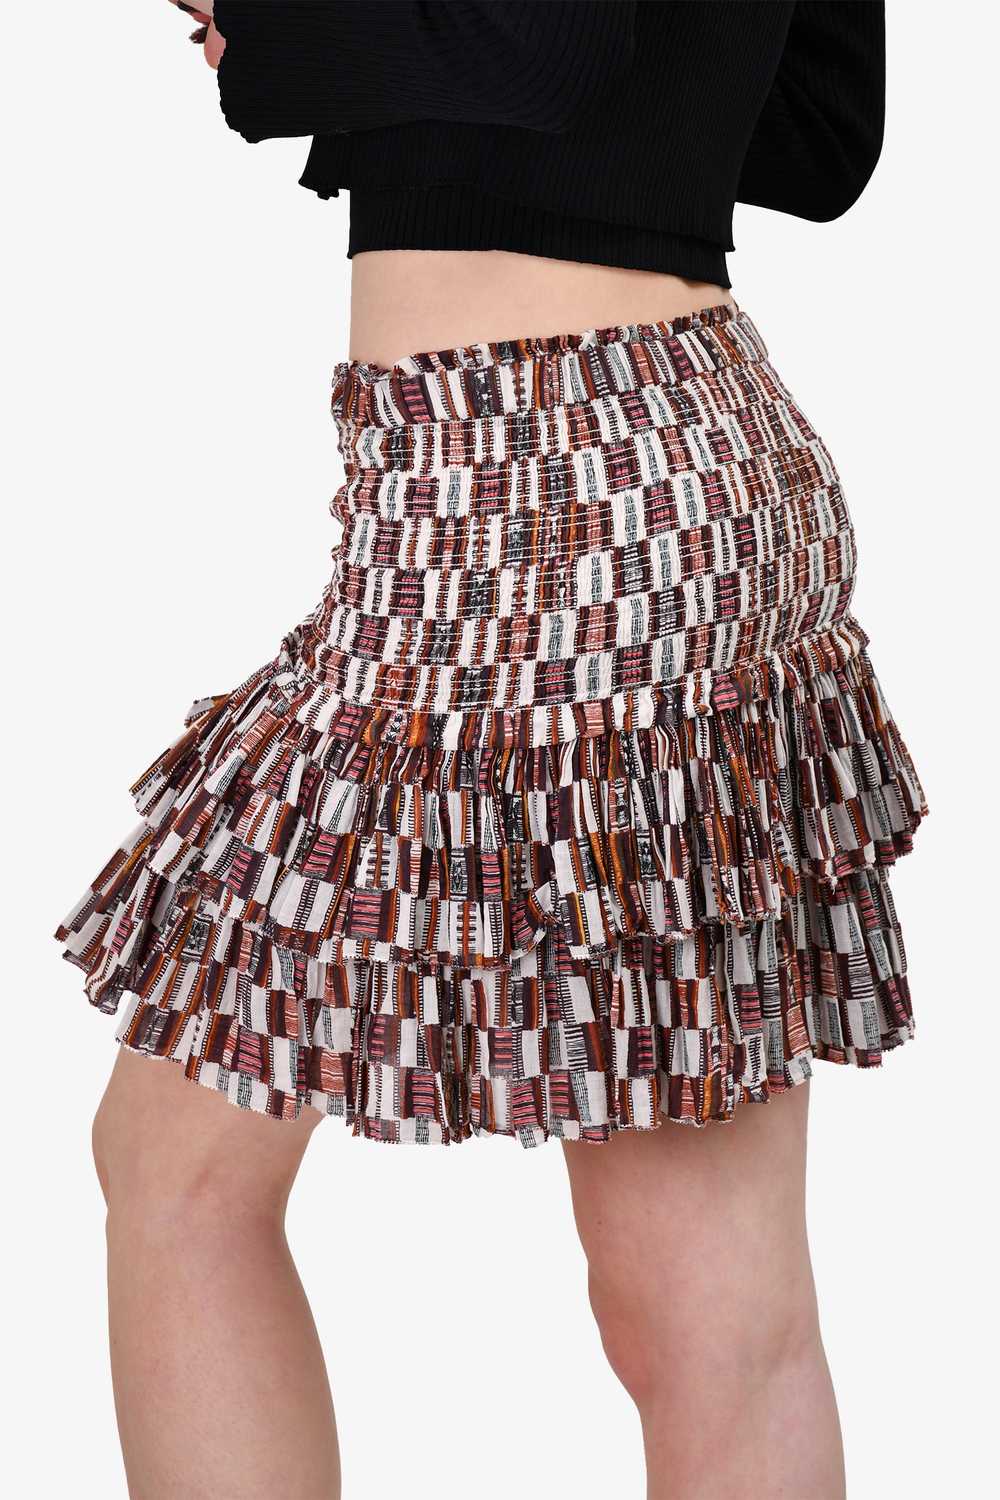 Isabel Marant Etoile Brown And White Patterned Co… - image 3